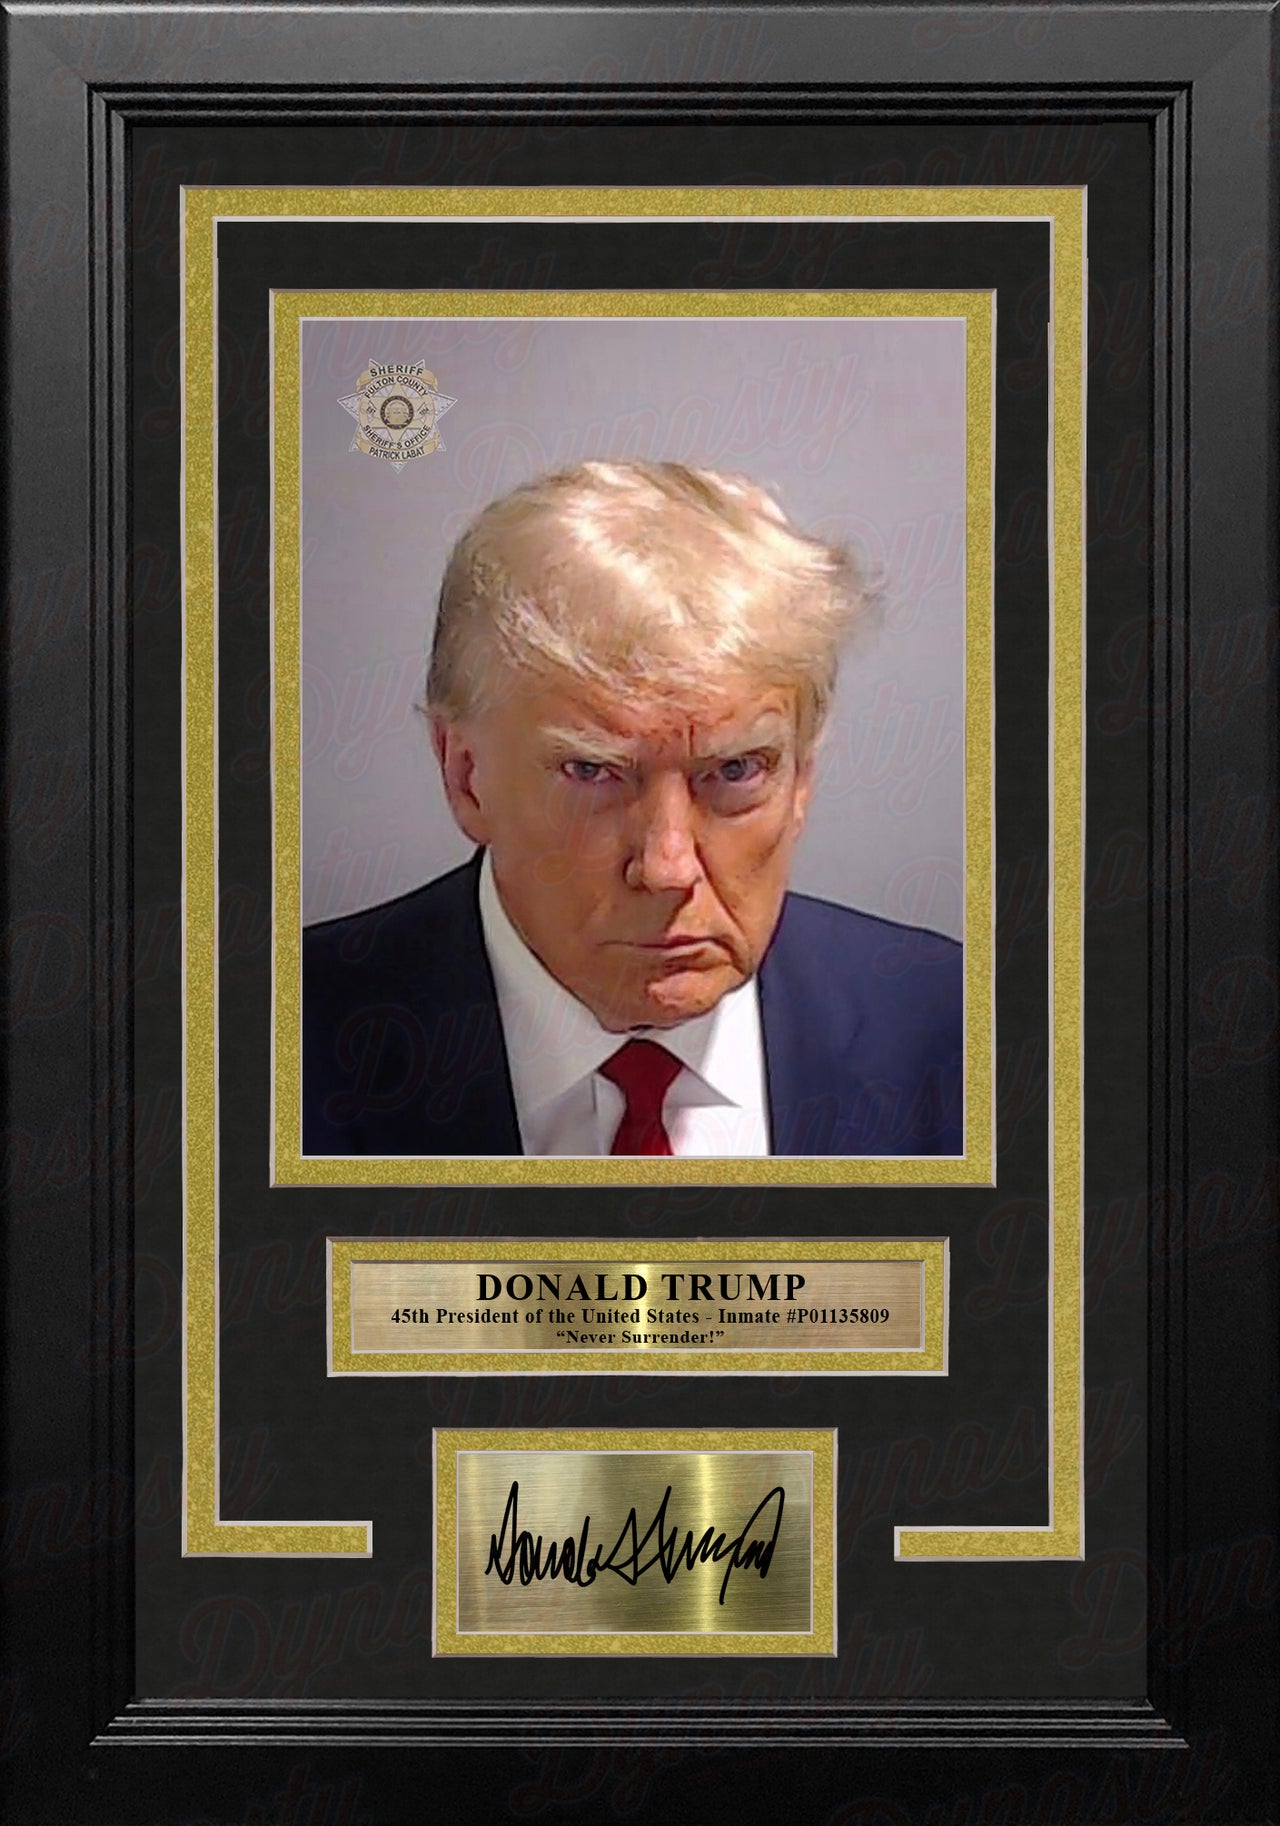 Donald Trump 45th President Fulton County Jail Mugshot 8" x 10" Framed Photo with Engraved Autograph